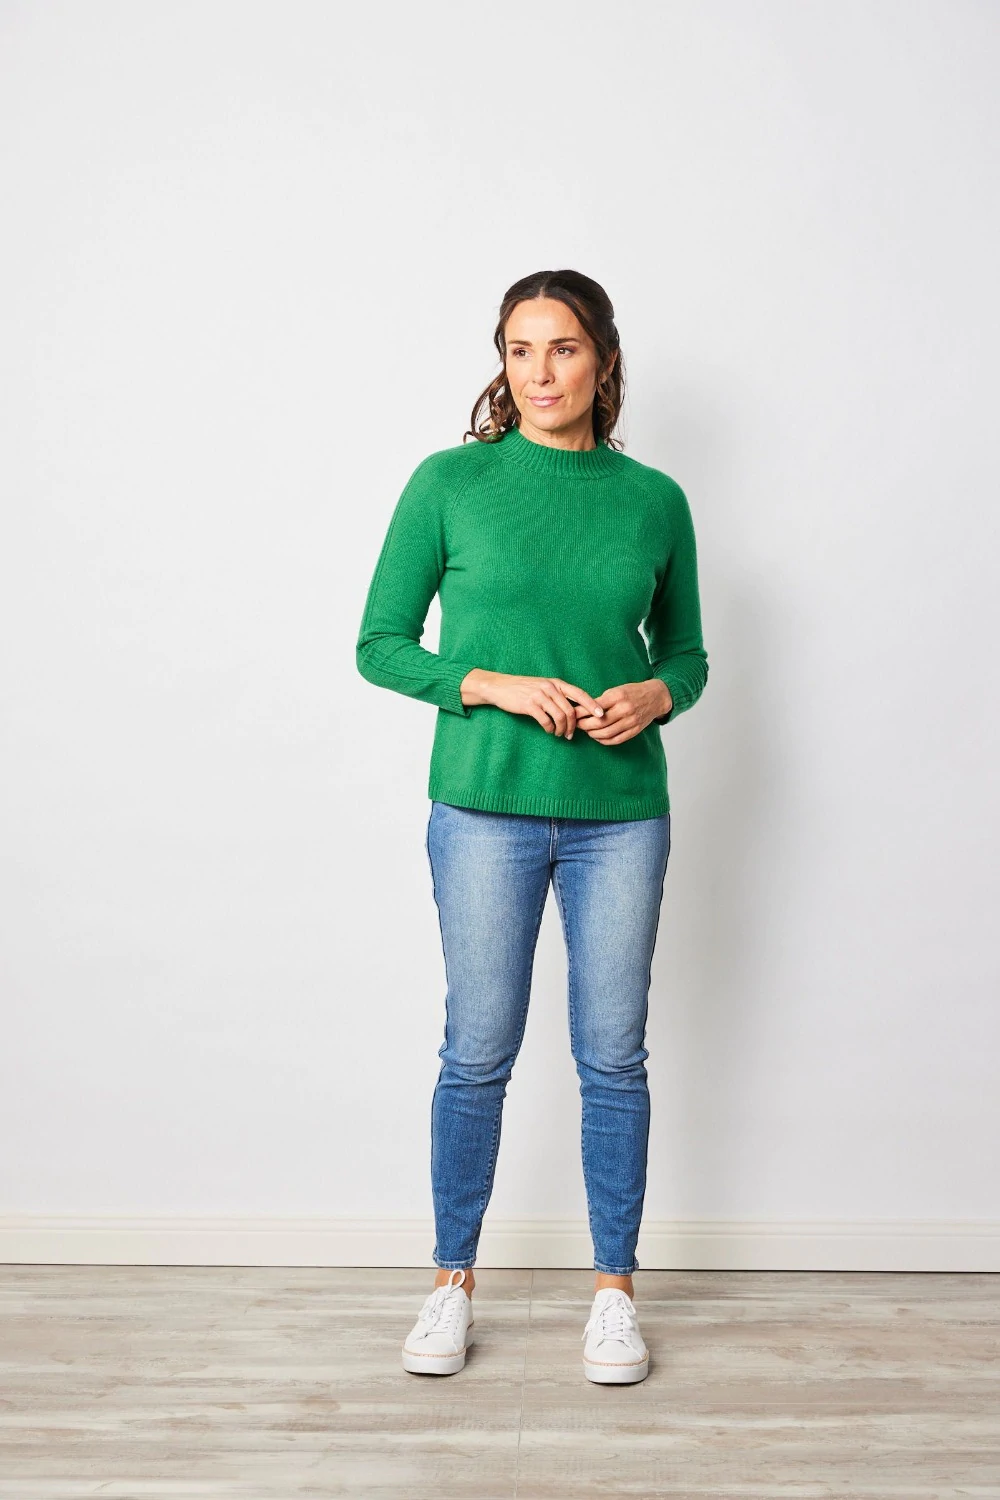 Cotton/Wool Mock Neck Ribbed detail Sweater - Emerald Isle knit See Saw   